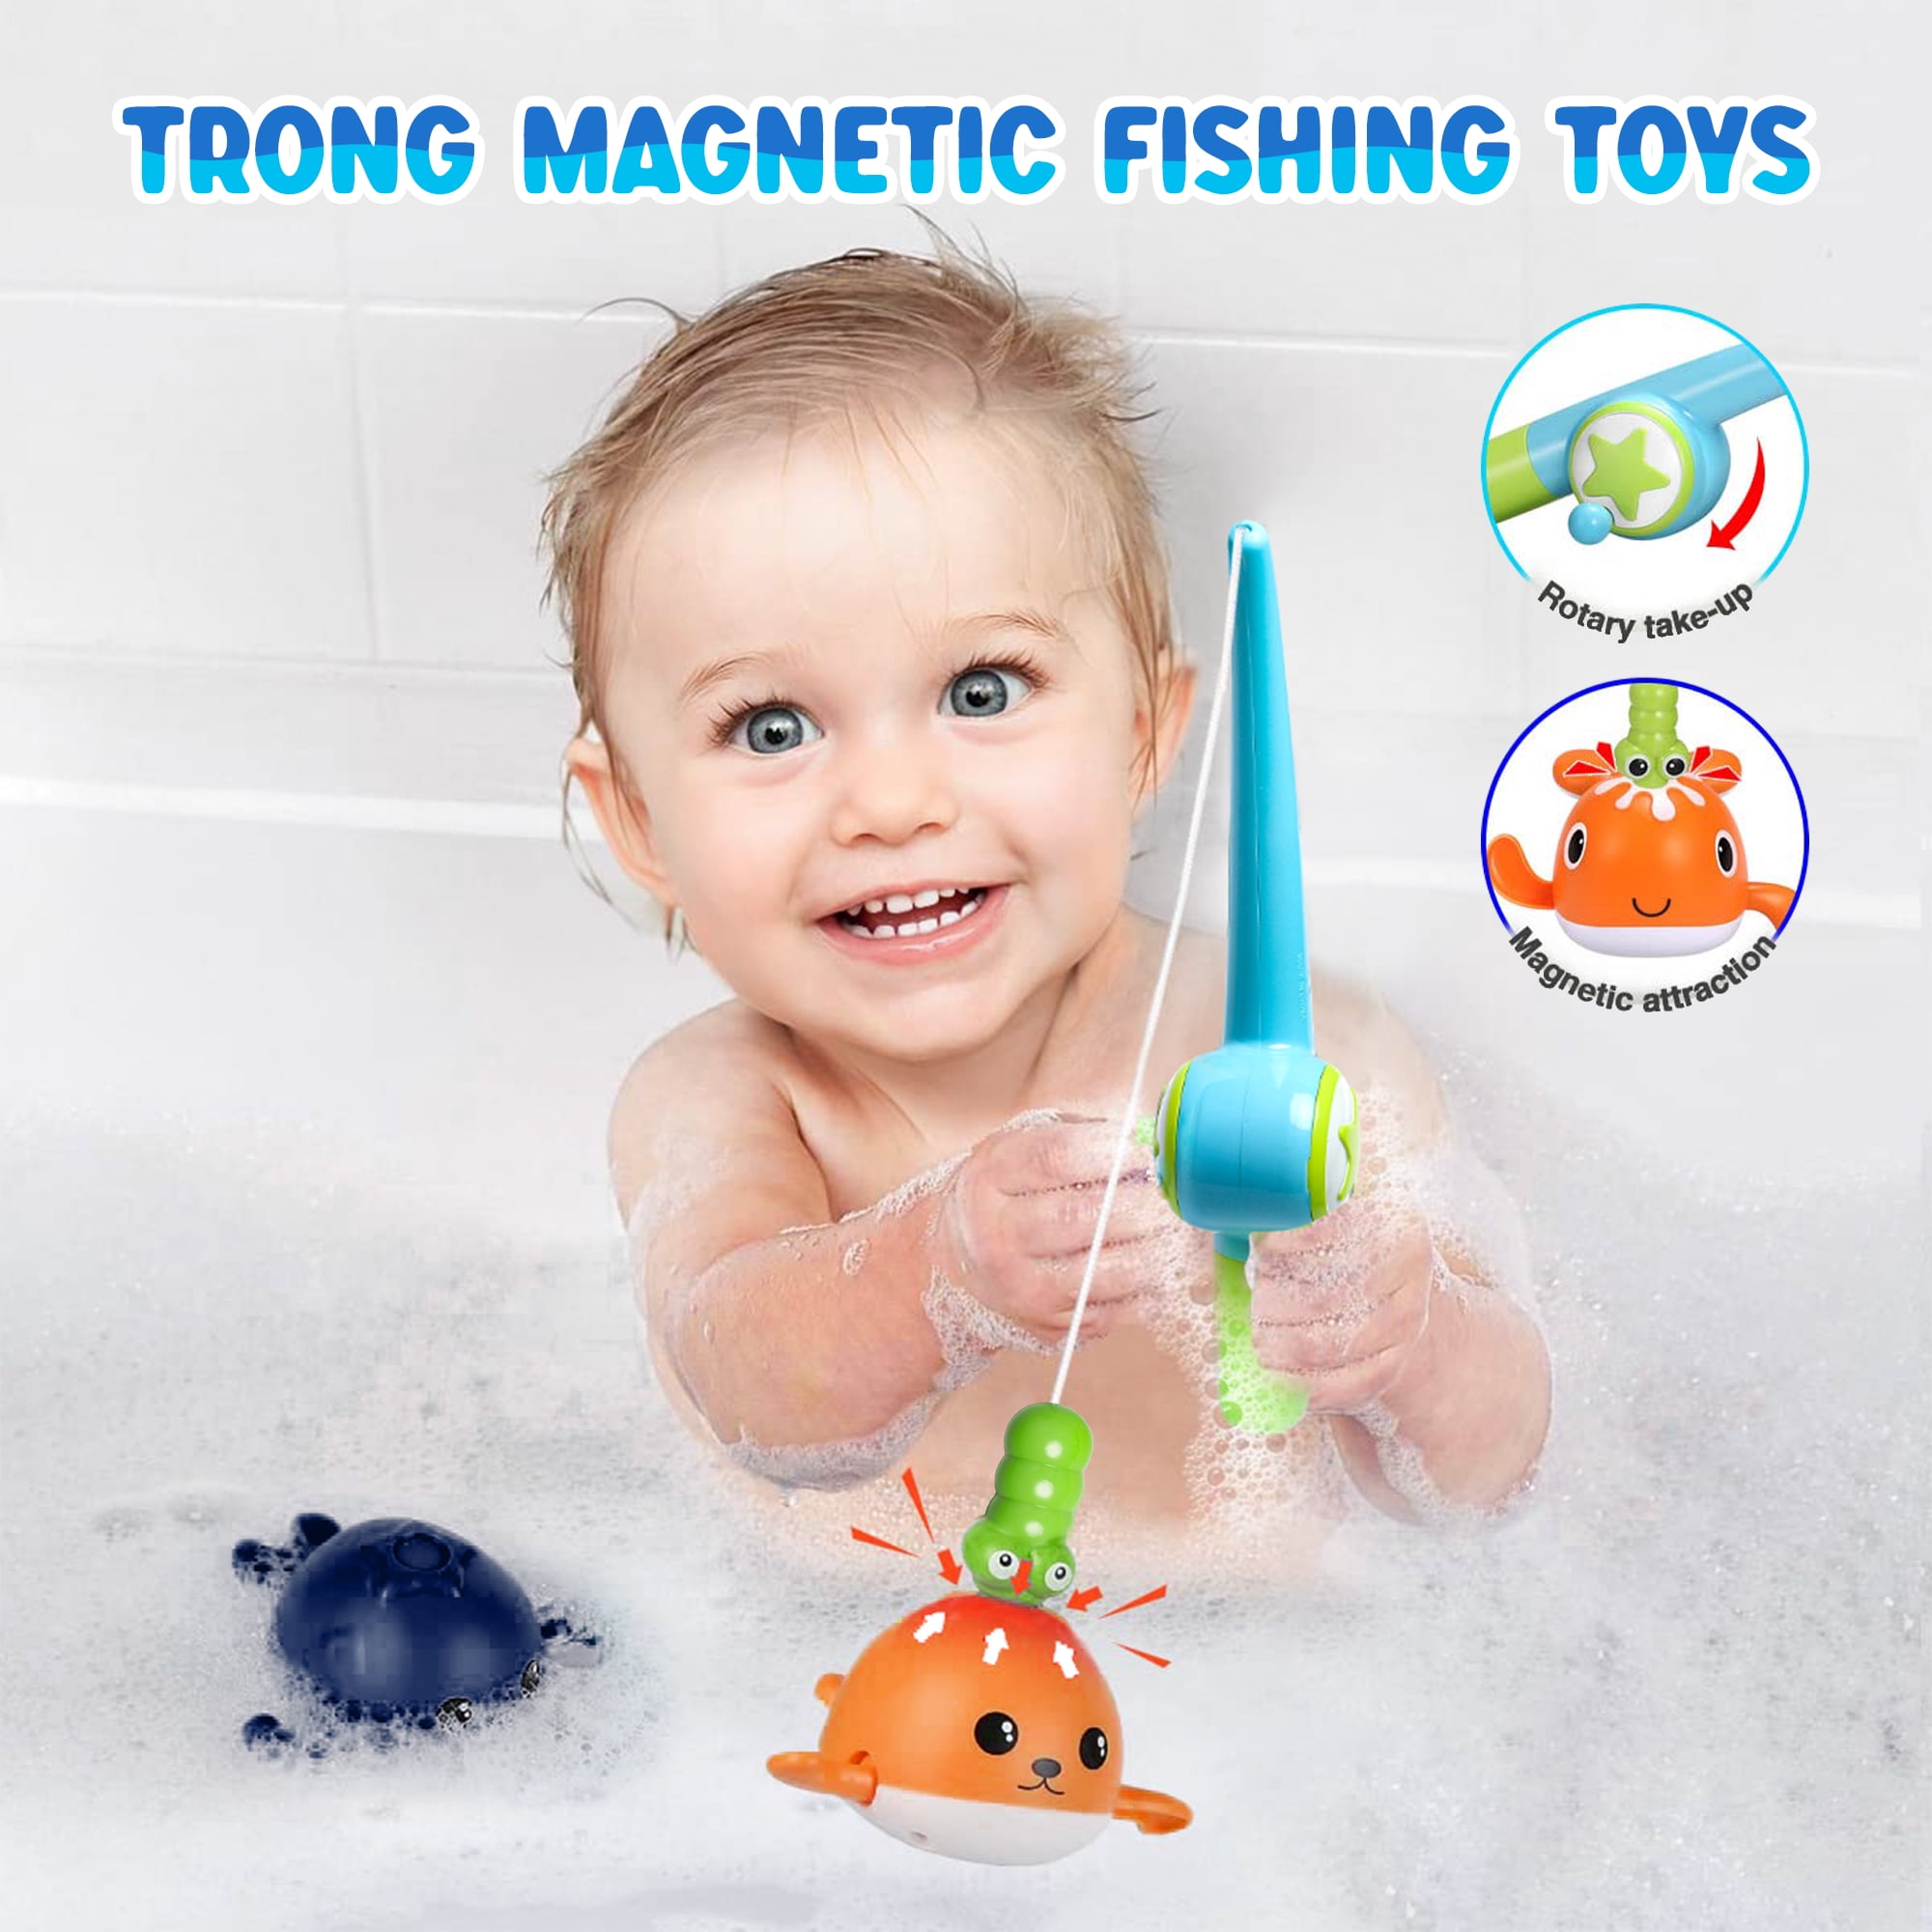 Beefunni Bath Toys for Toddlers,4 Pcs Light Up Floating Rubber Animal Toys  Set with Fishing Net, Bathtub Tub Toy for Toddlers Baby Kids Infant Girls